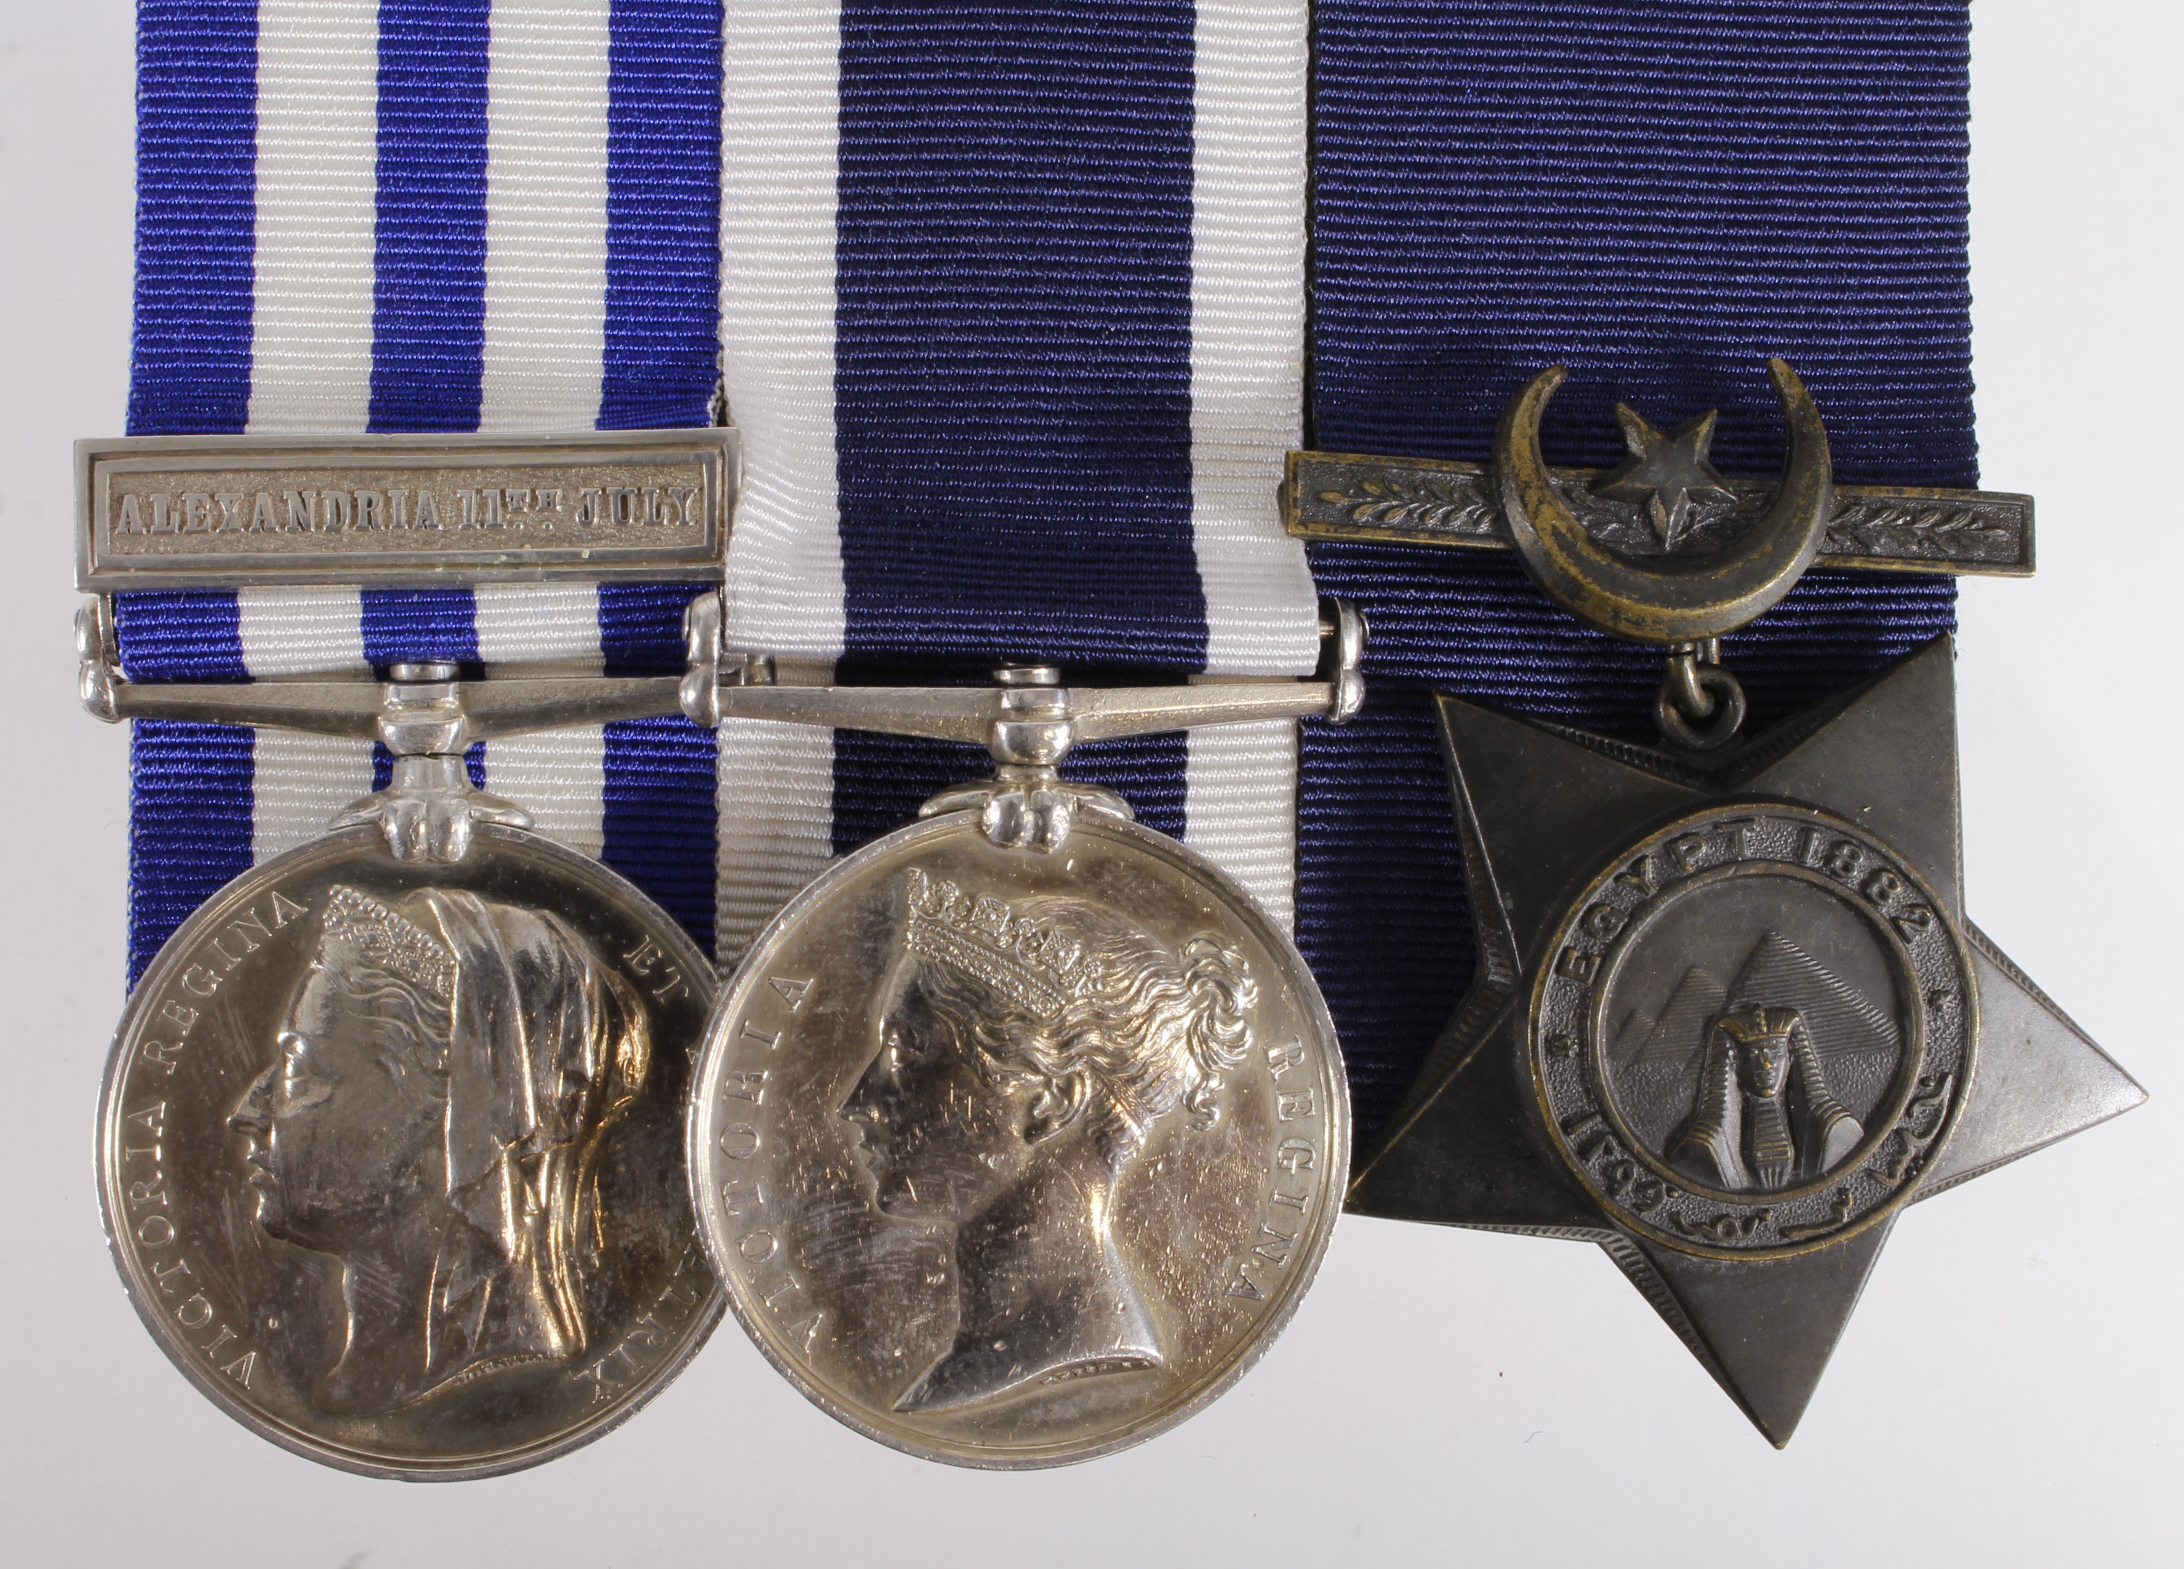 Egypt Medal dated 1882 with Alexandria 11th July clasp (F A Burrow. SIGn 2nd CL HMS Invincible),